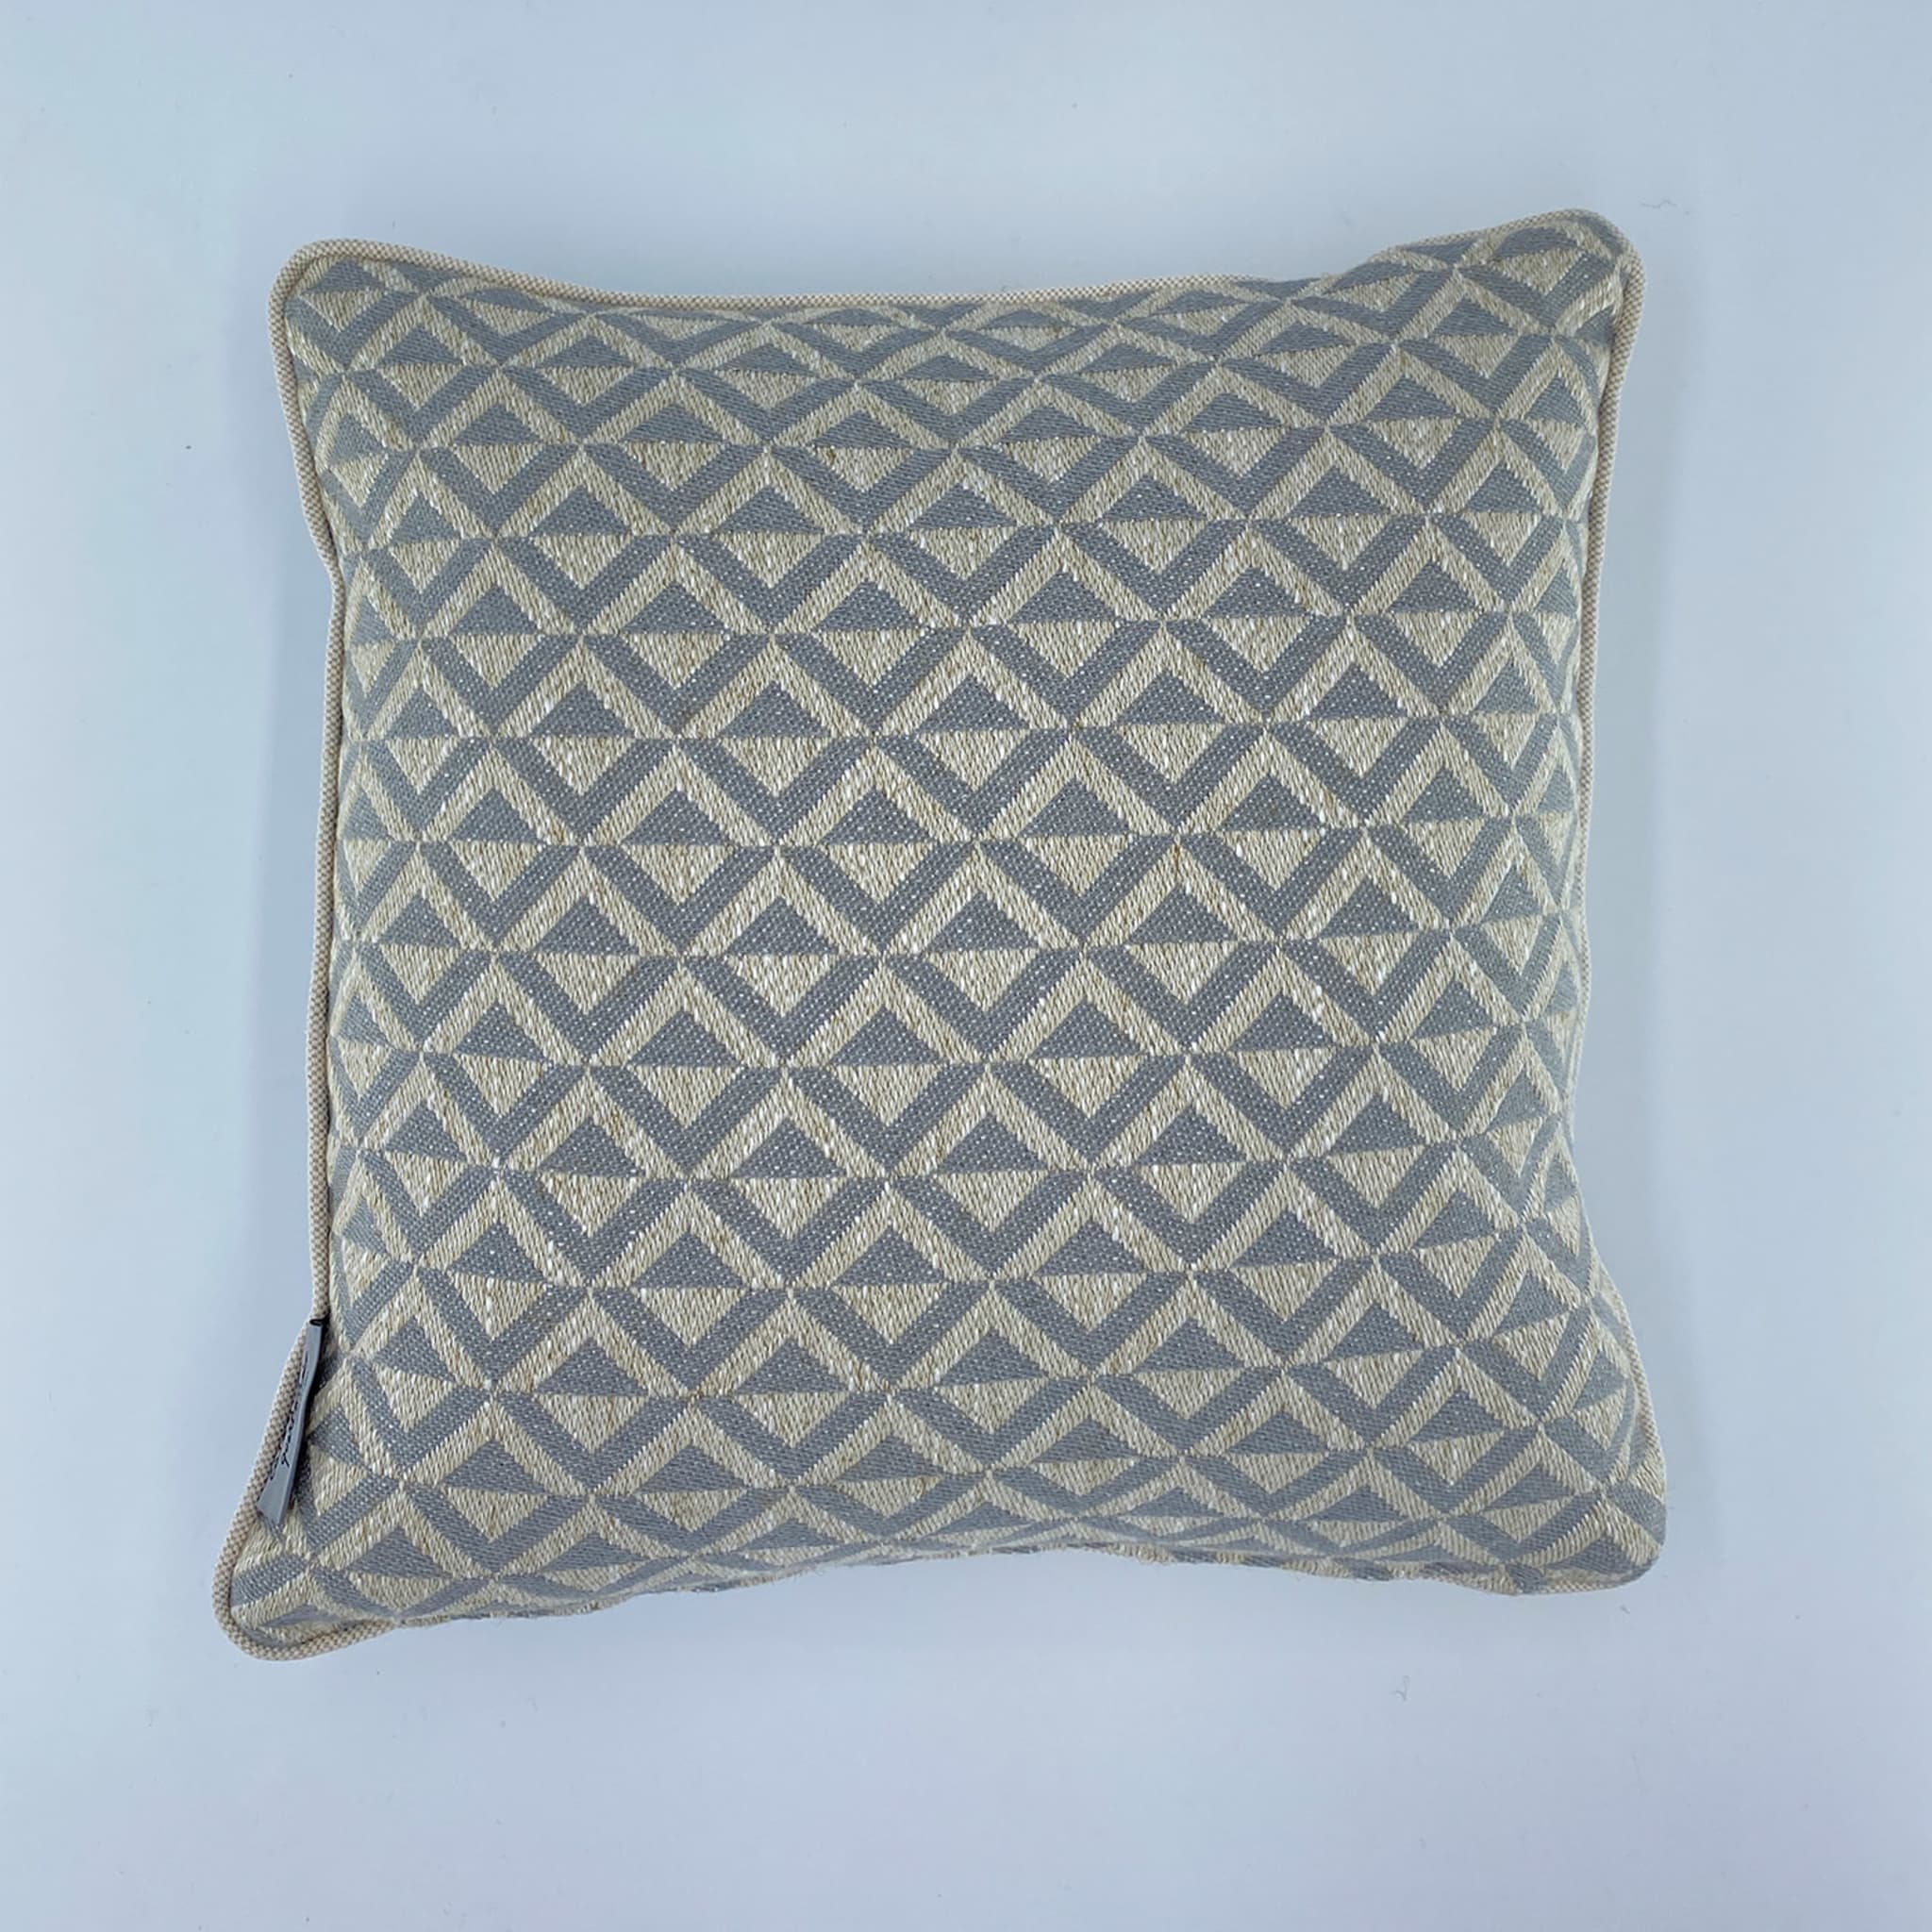 Losanghe Patterned Gray/Mid-Blue Square Cushion - Alternative view 1